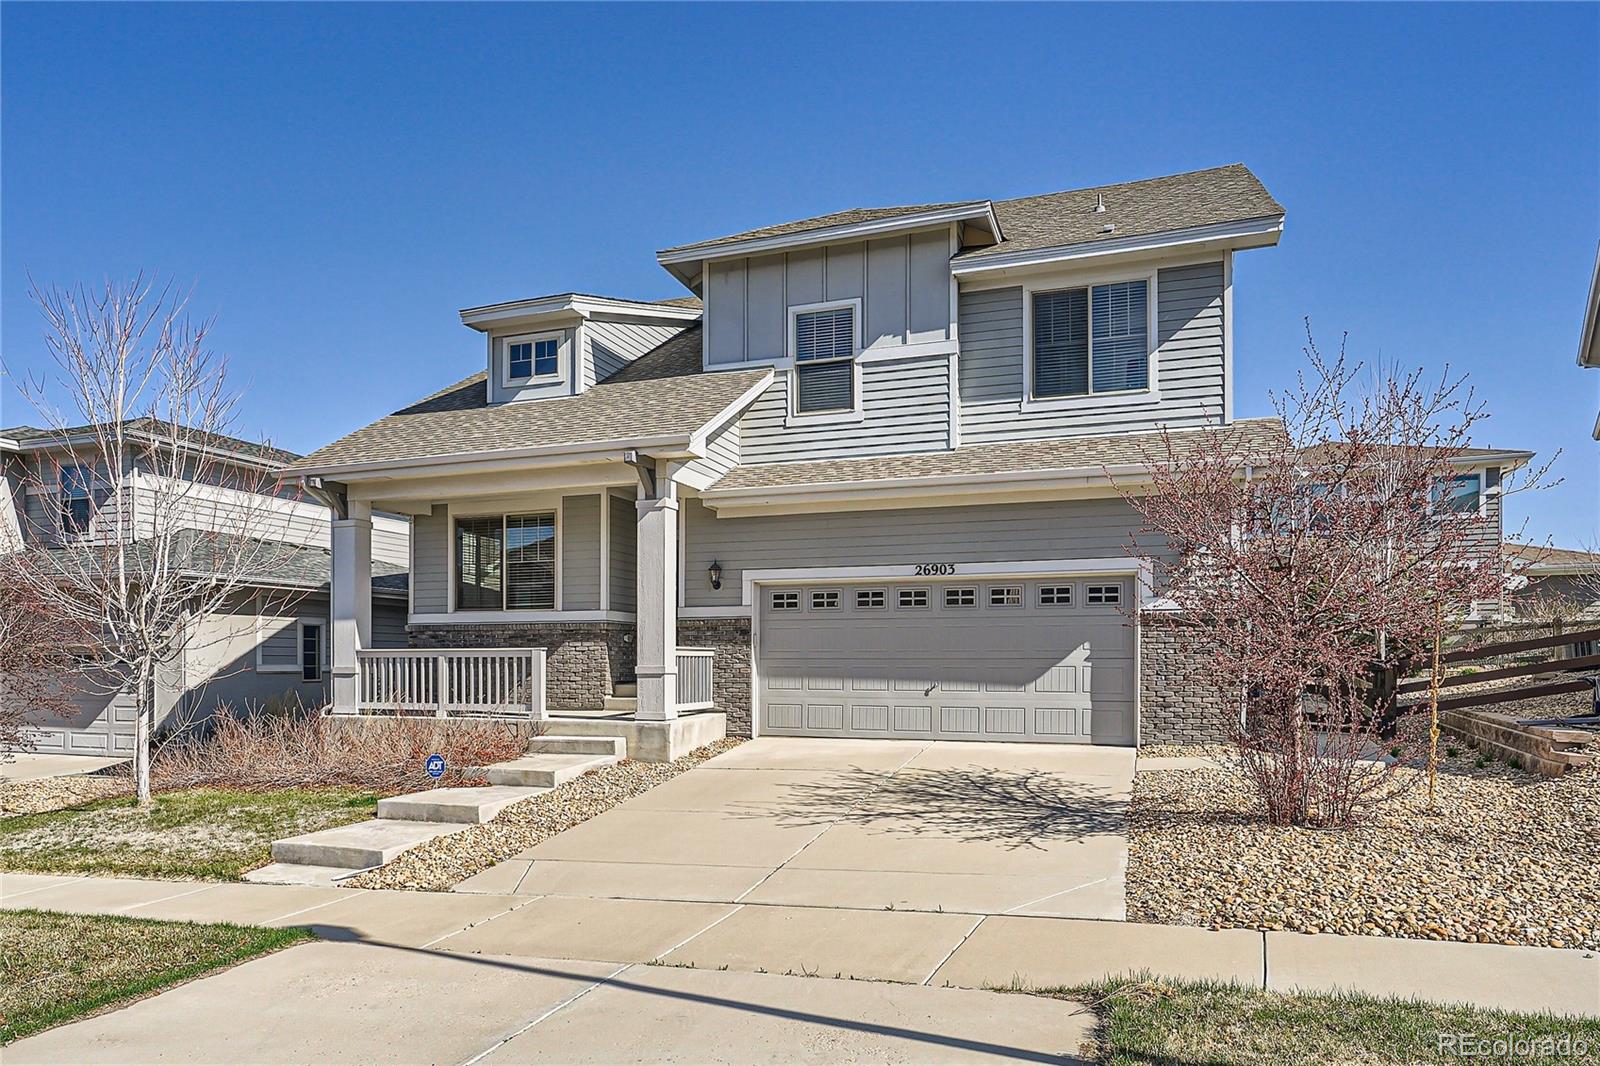 26903 E Easter Place, aurora MLS: 8273216 Beds: 5 Baths: 4 Price: $750,000